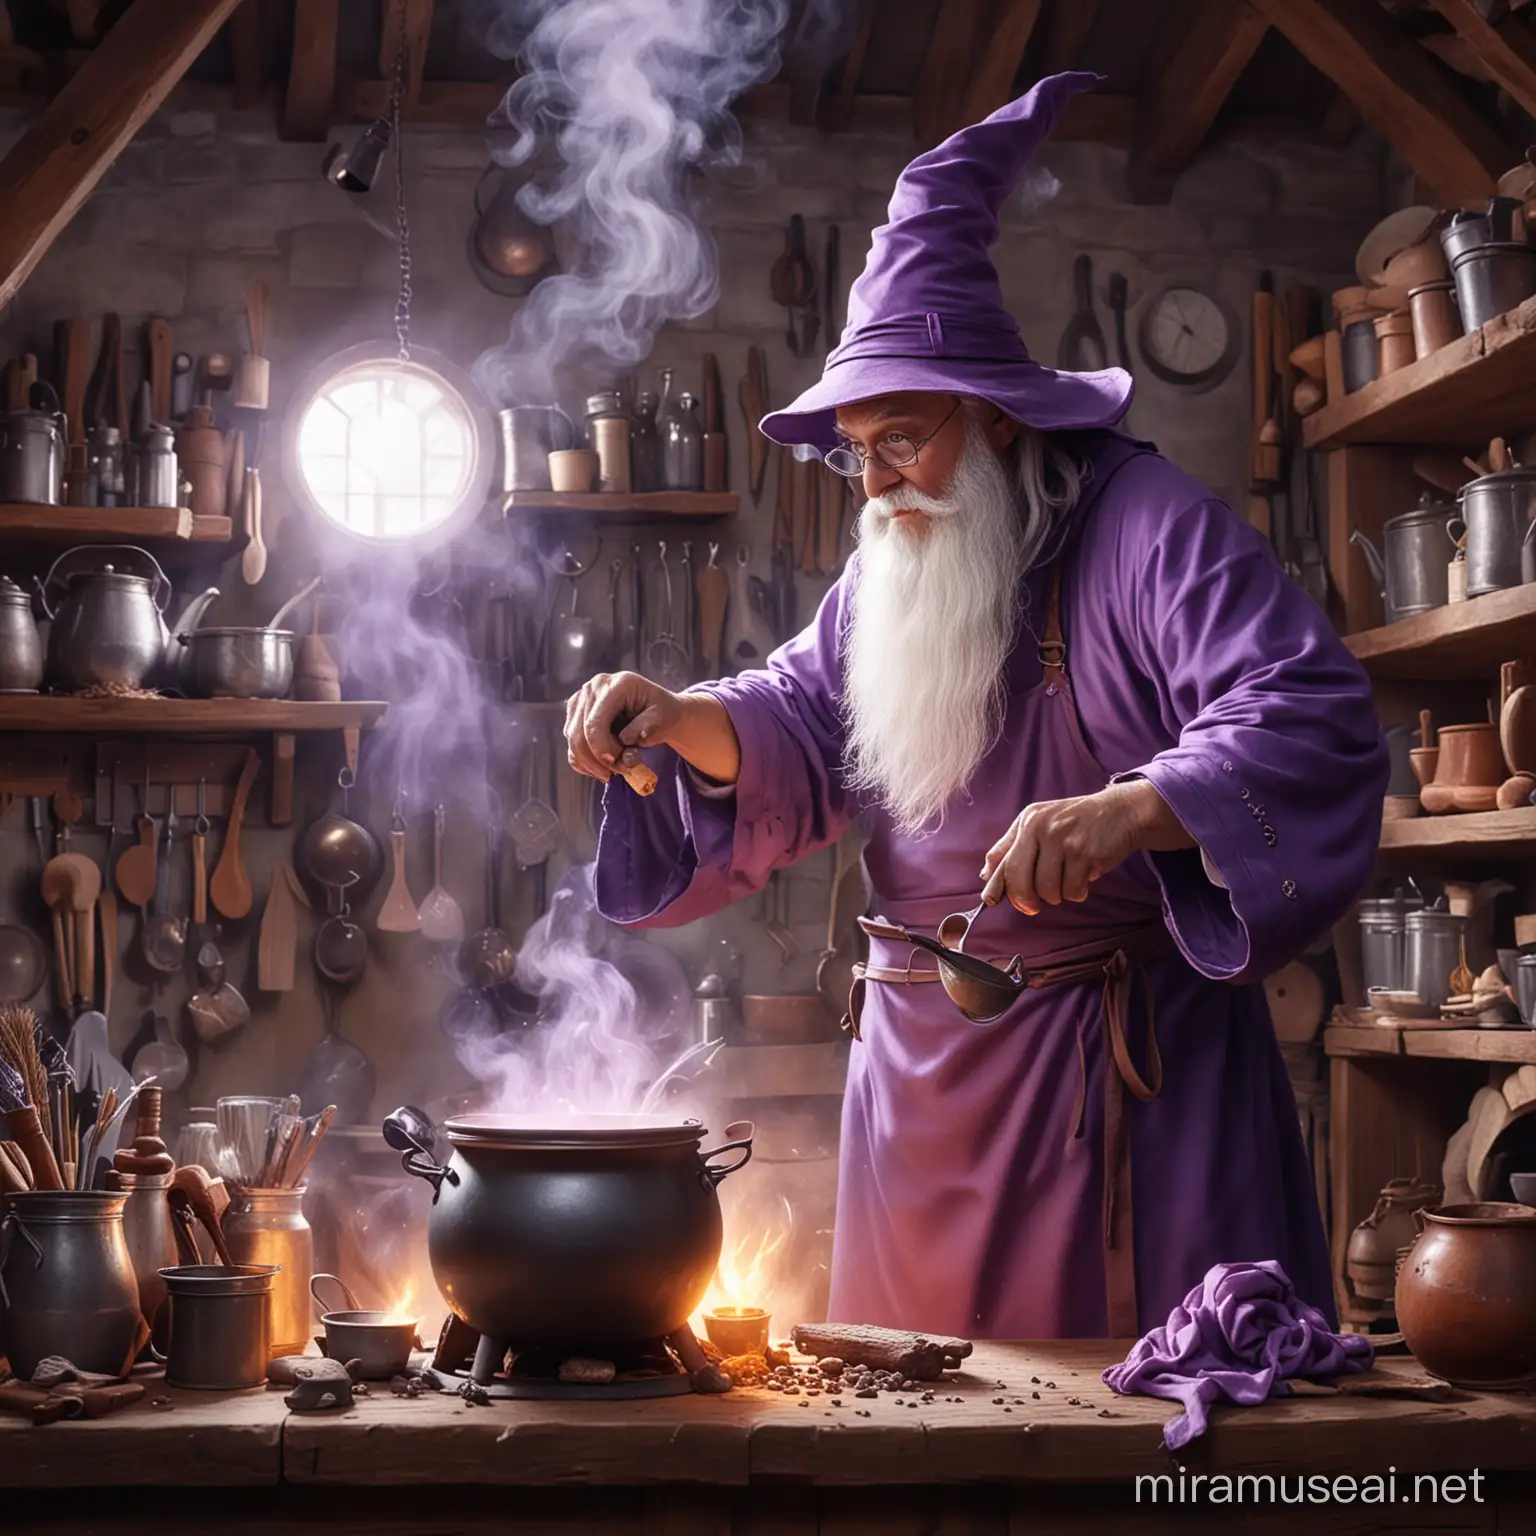 wizzard coocking in kettle in his workshop. make image drawn. light purple color theme.